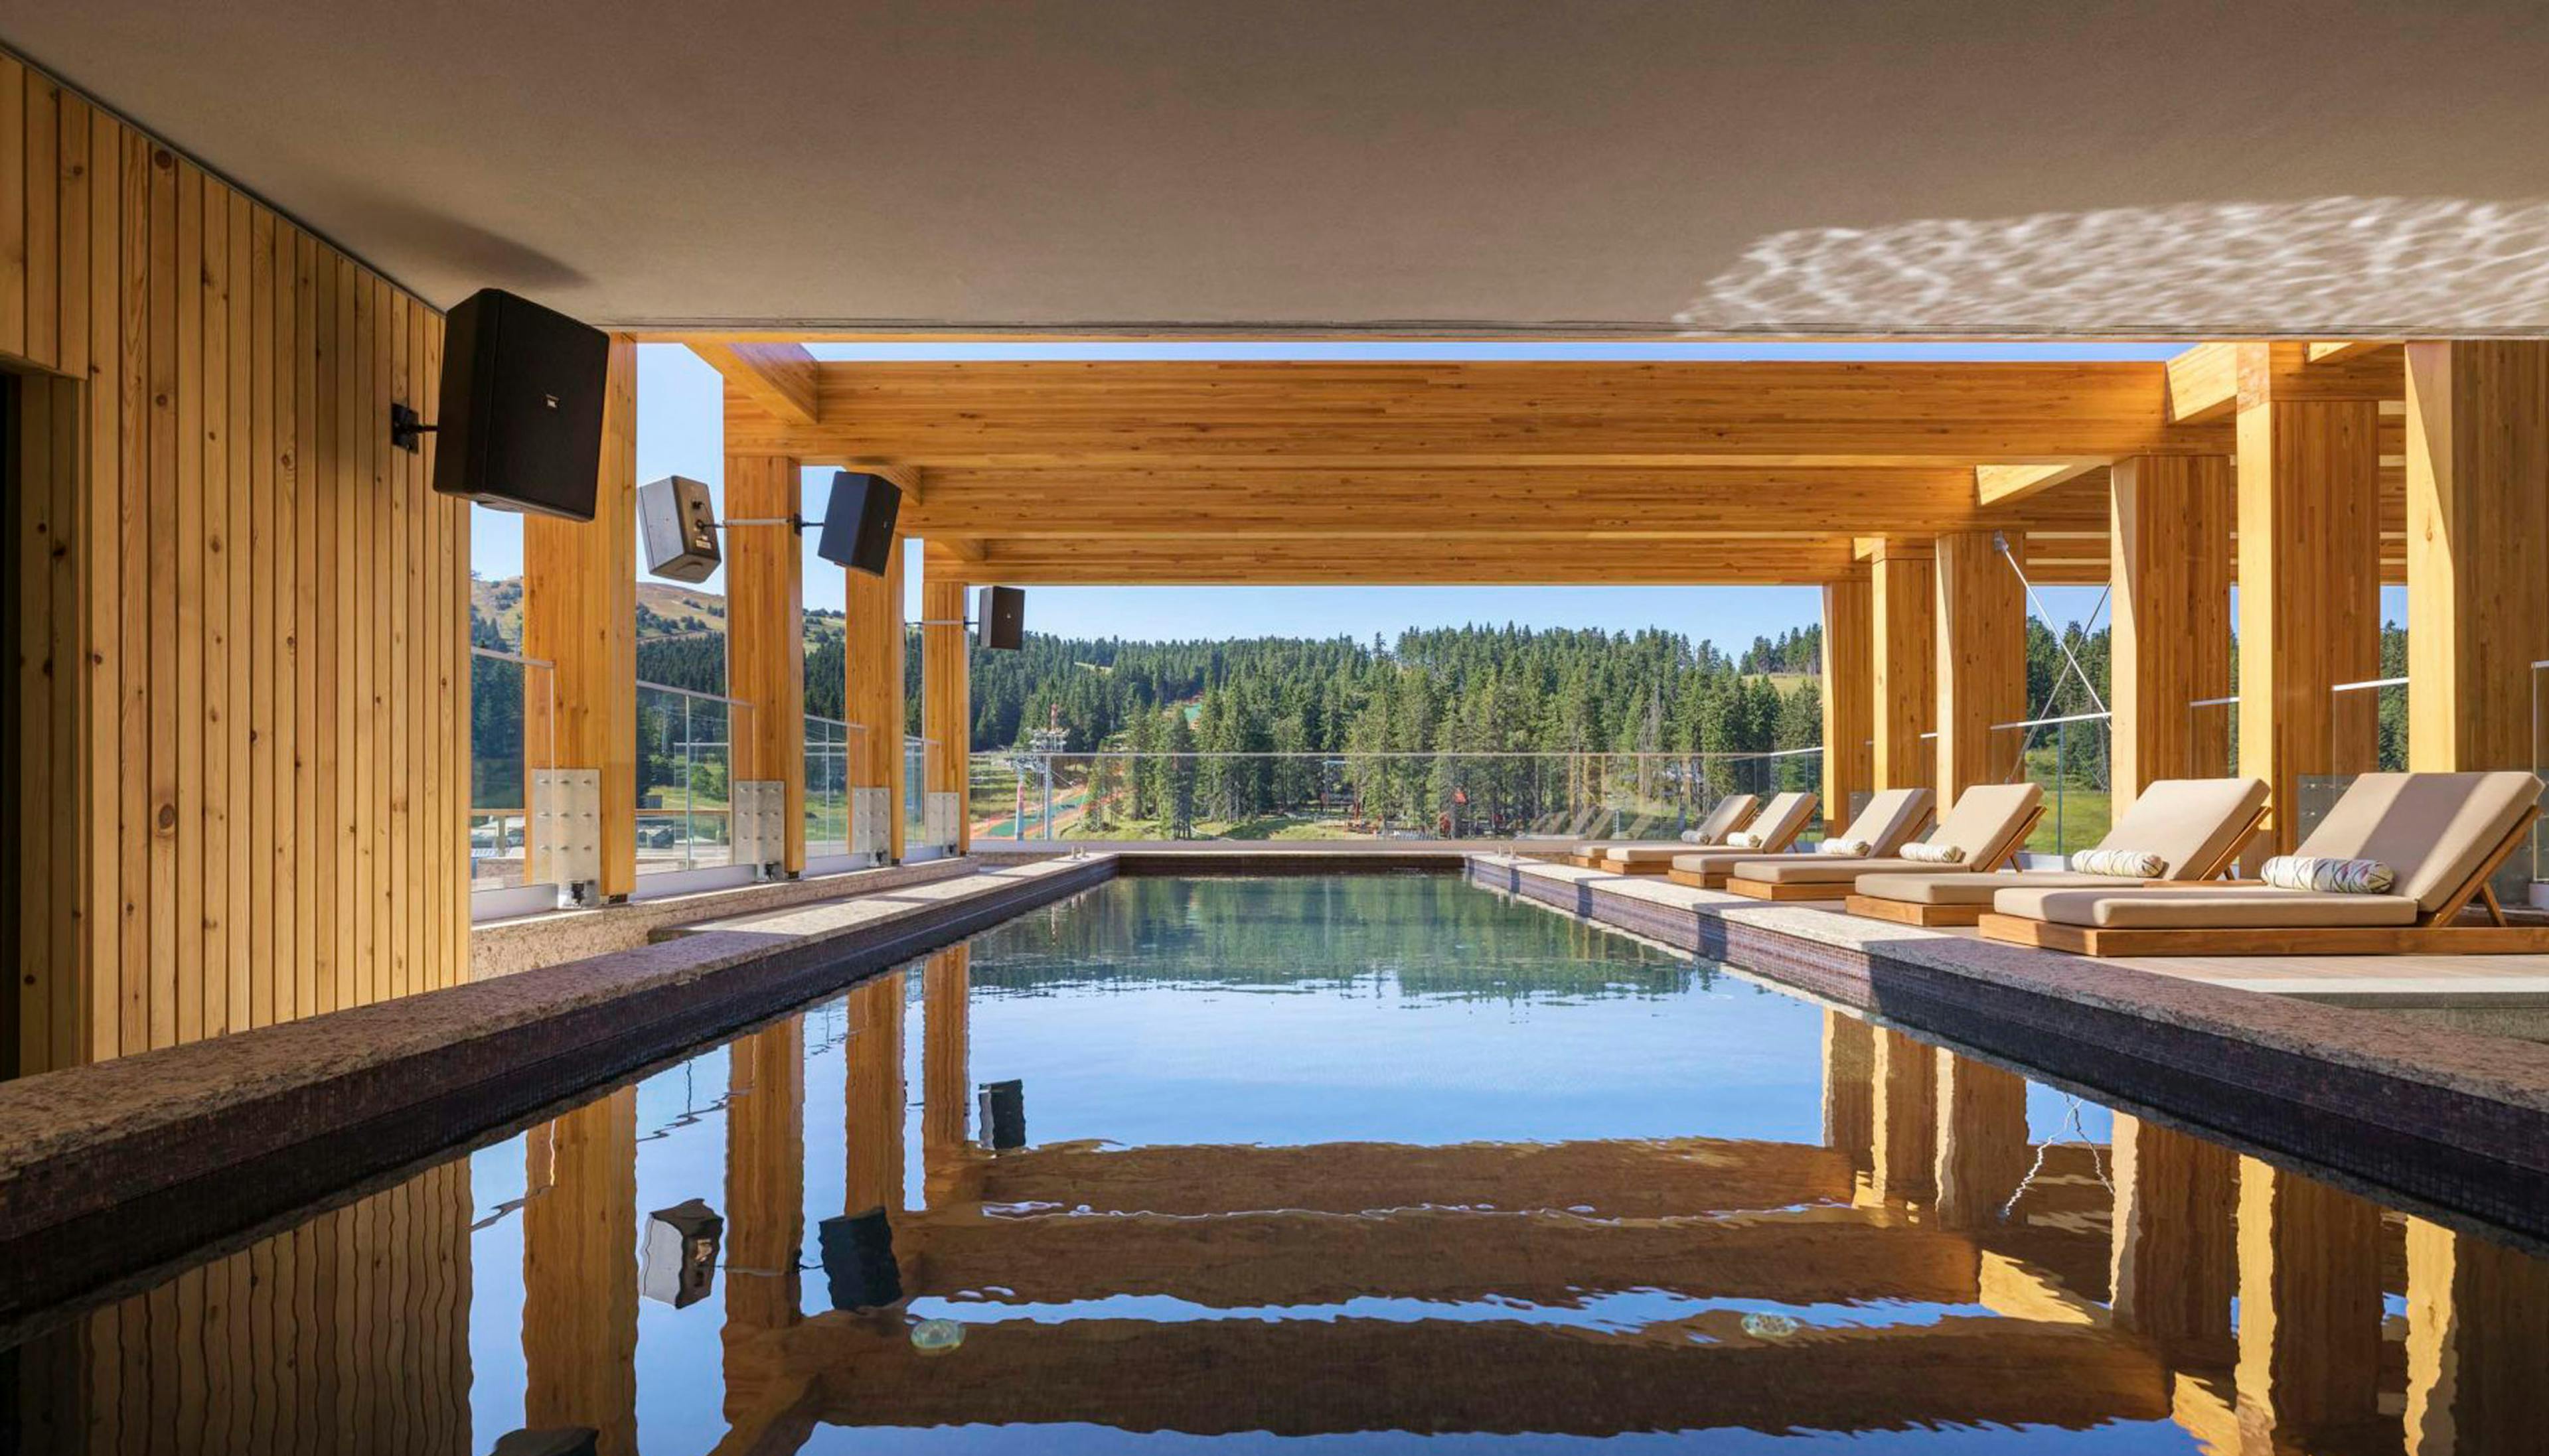 Pool covered with glulam beams